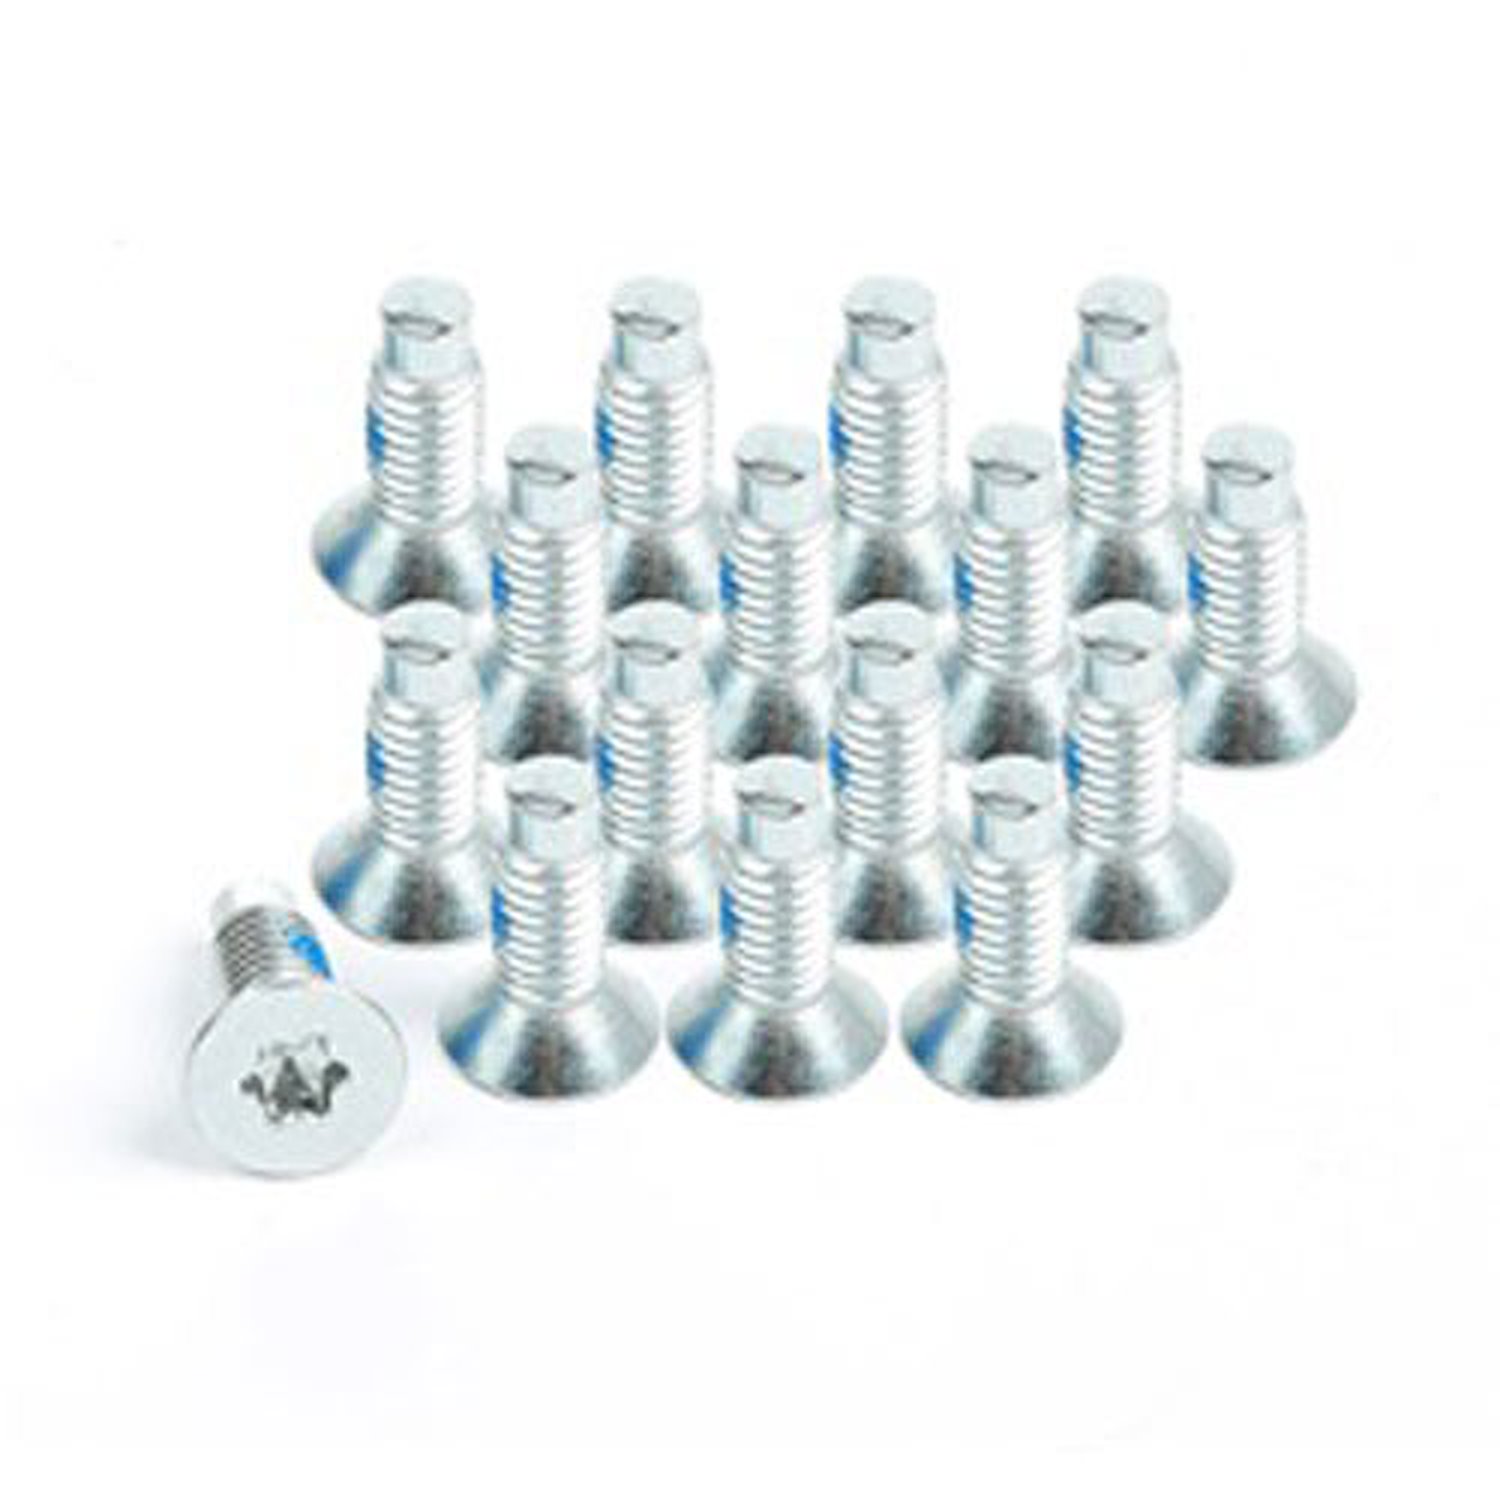 This is a set of 16 windshield hinge Torx screws from Omix-ADA fits 76-86 Jeep CJ models and 87-95 Wrangler.